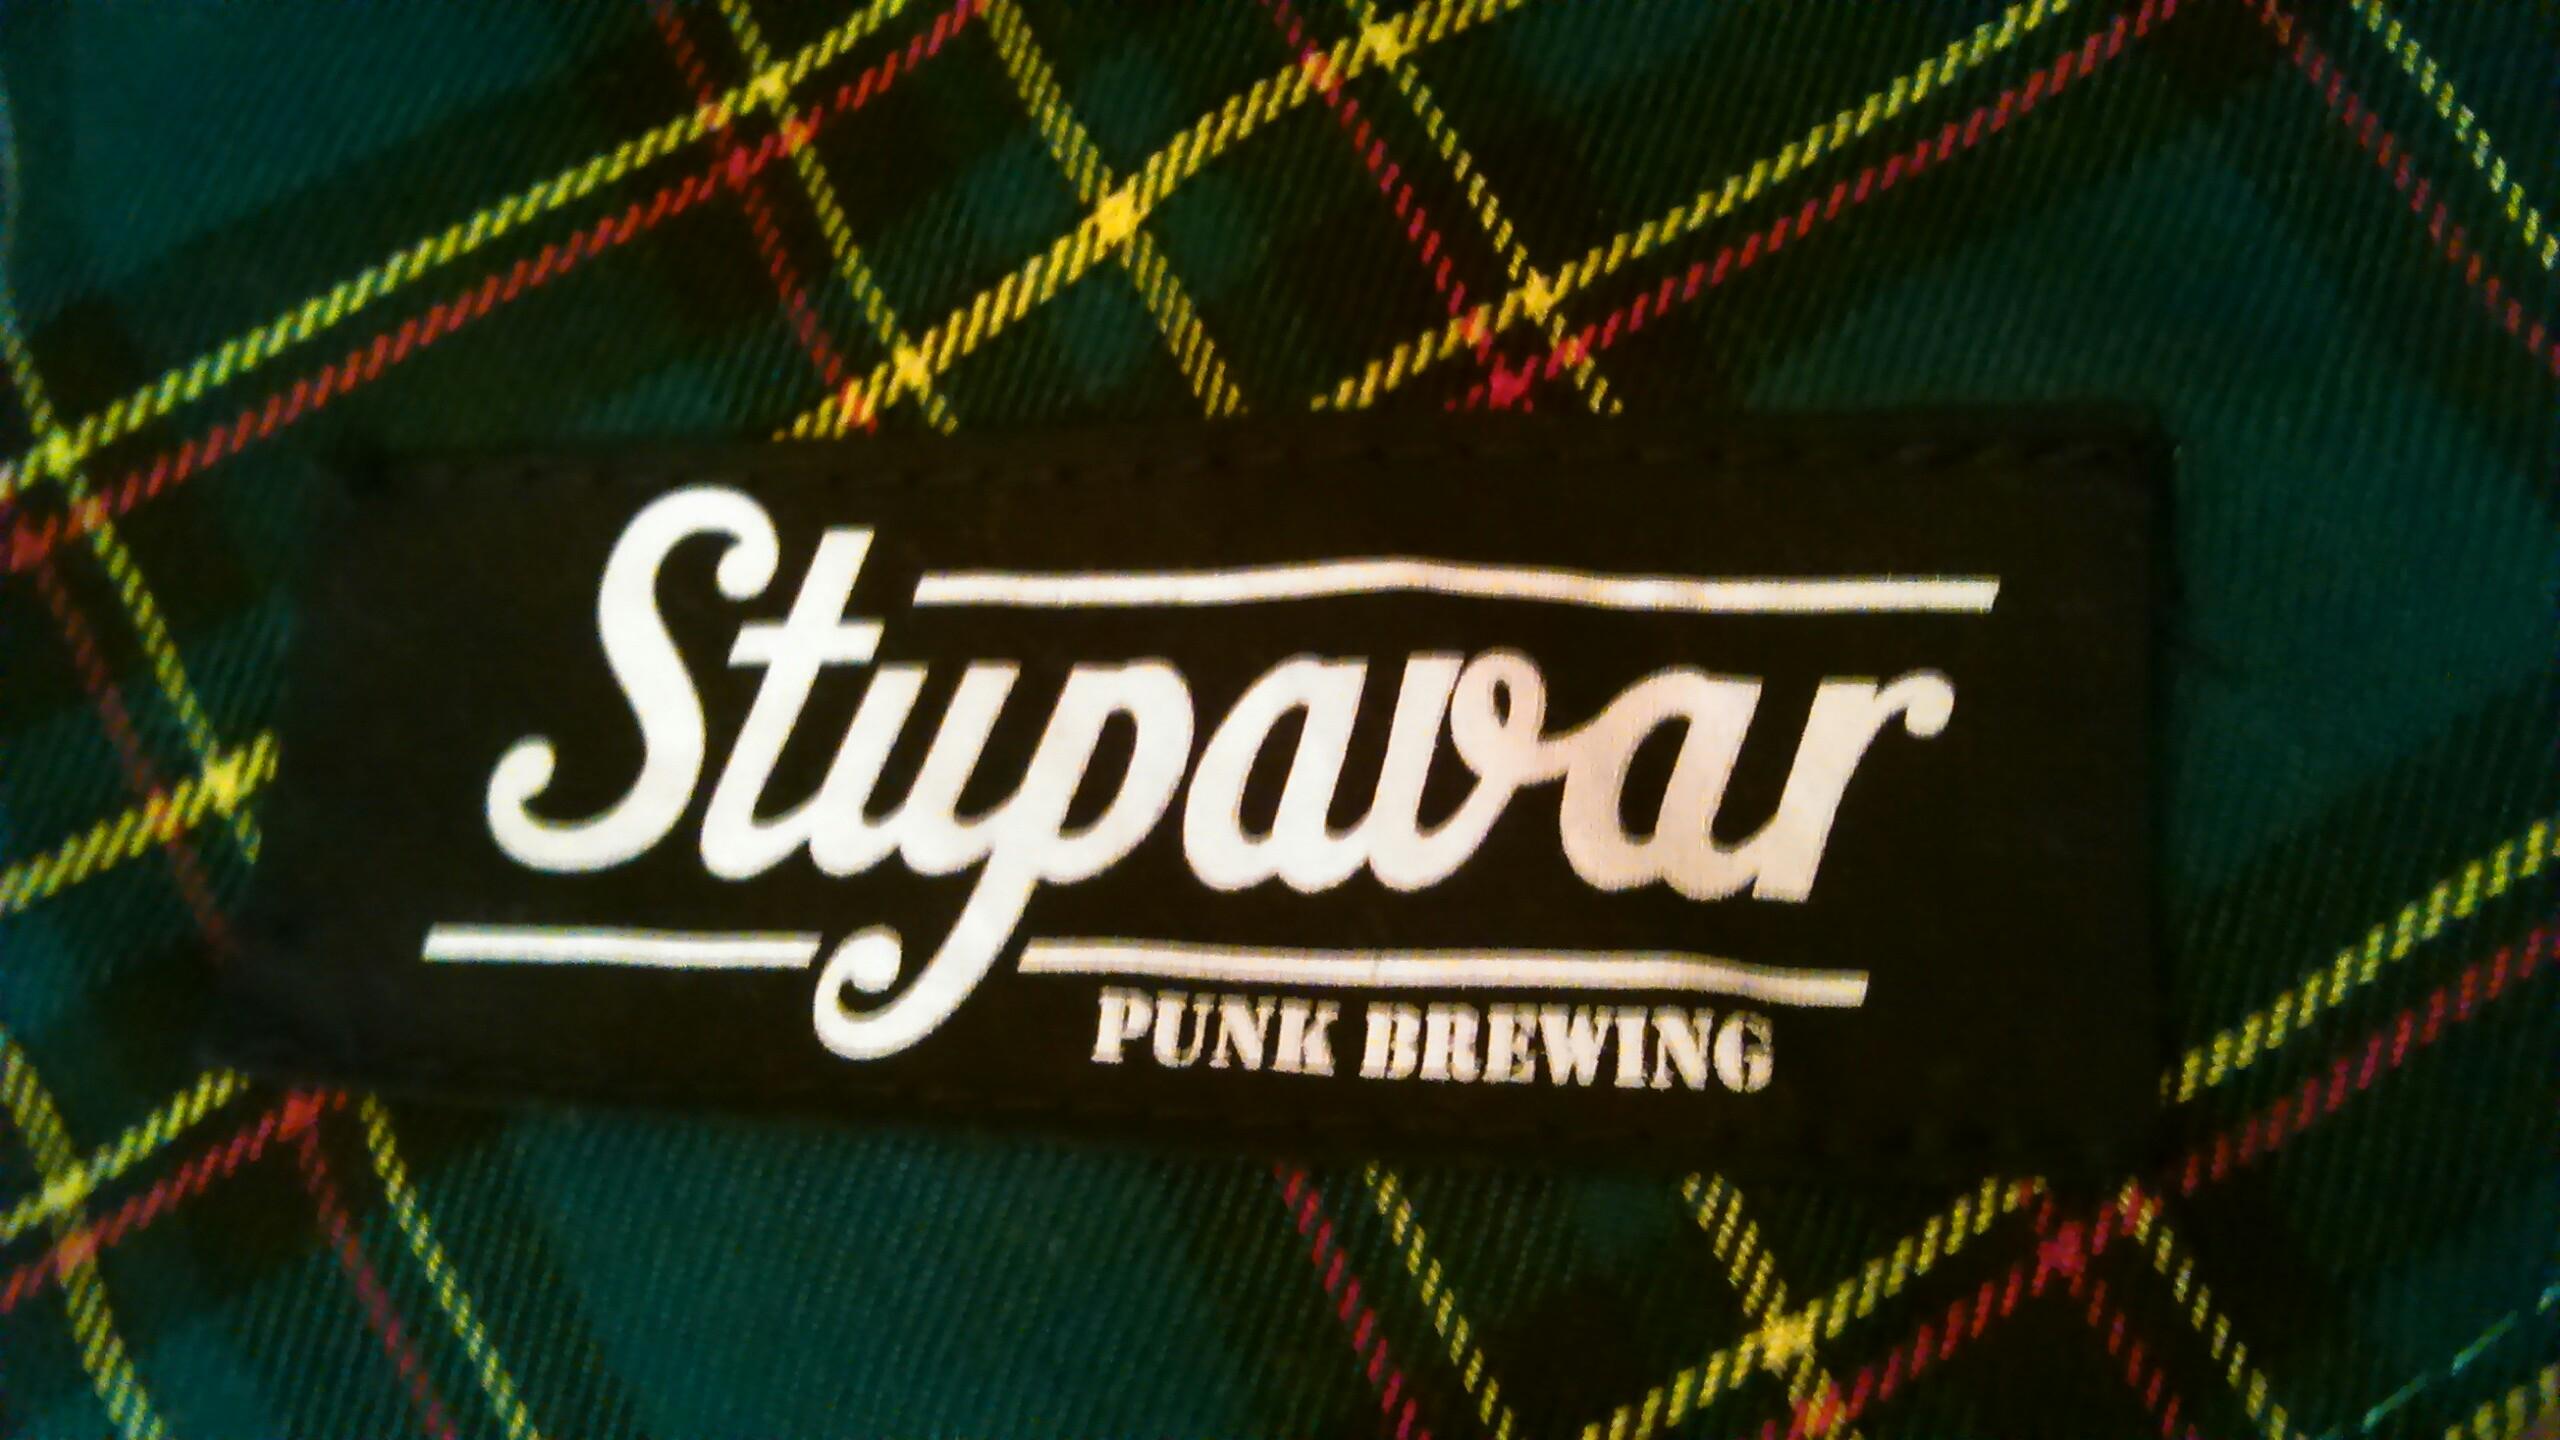 Cover image of this place Stupavar Beer Pub 